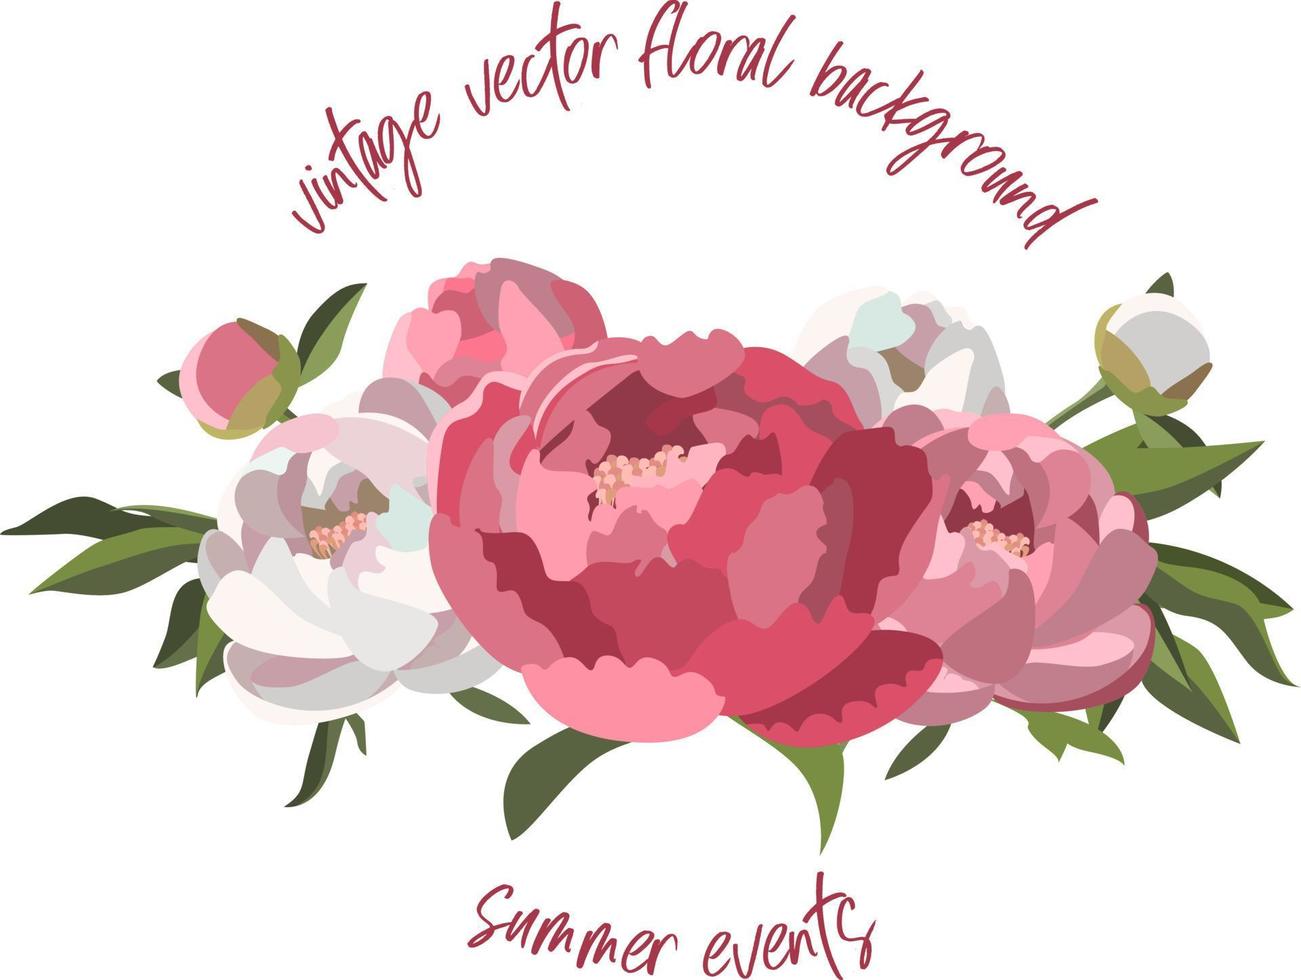 Vintage vector floral background template for greeting cards and invitations